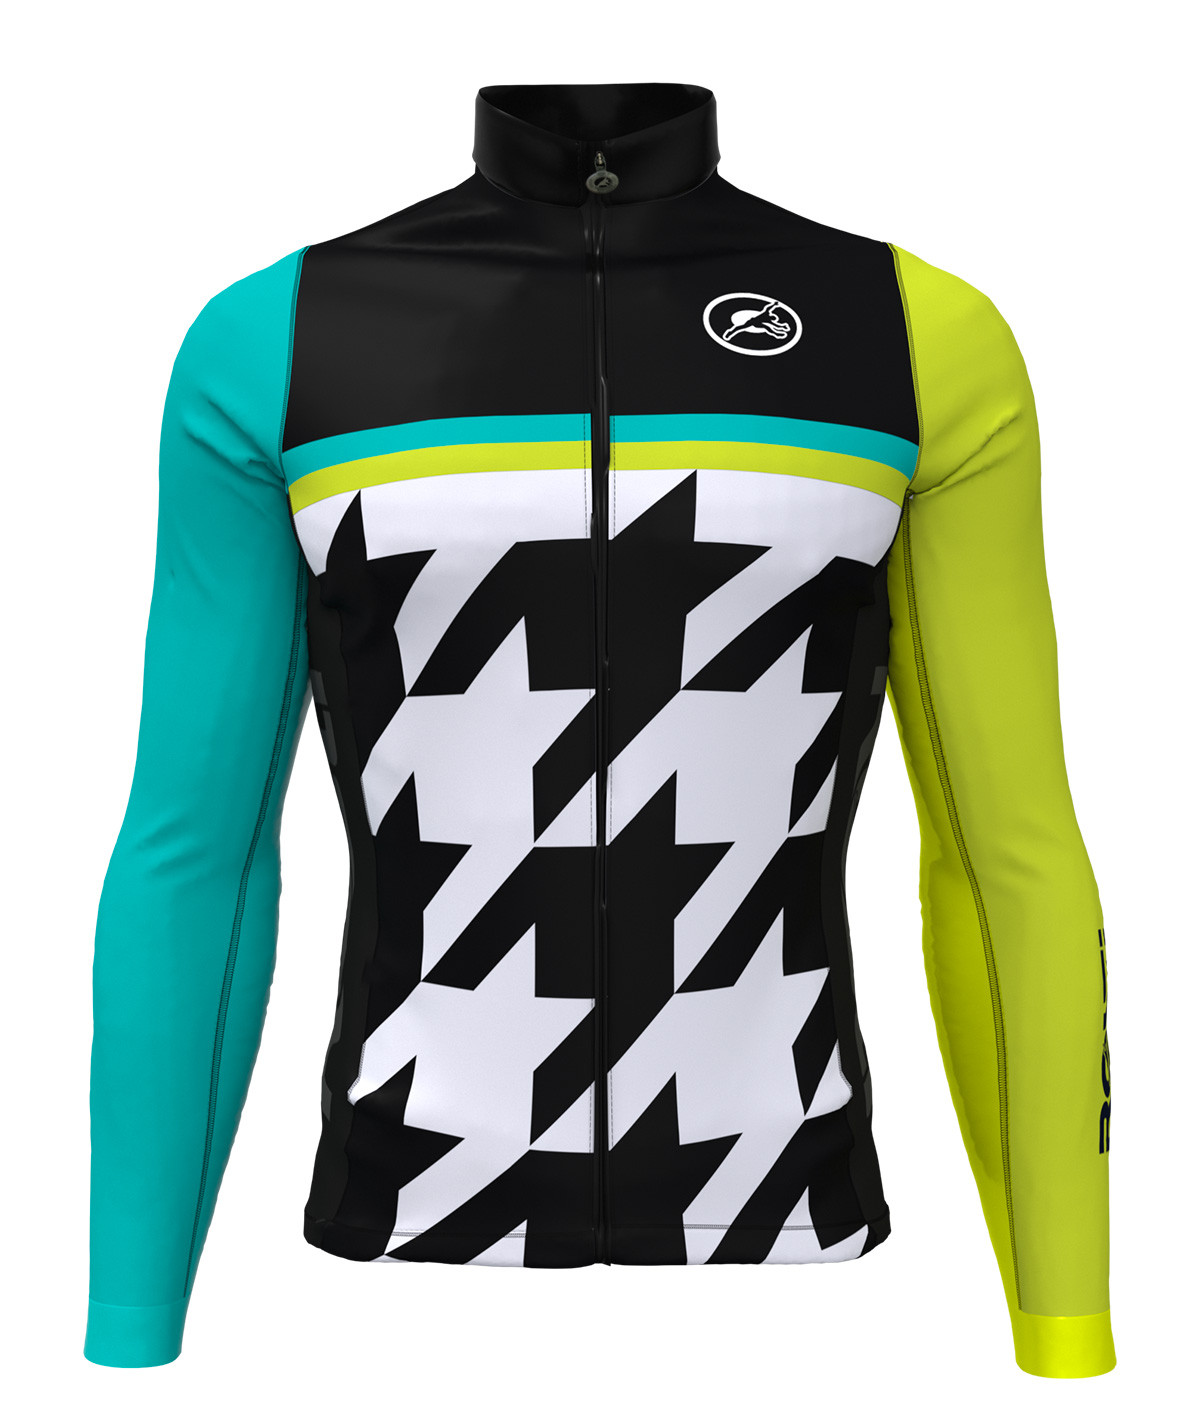 Contrast long sleeved jersey